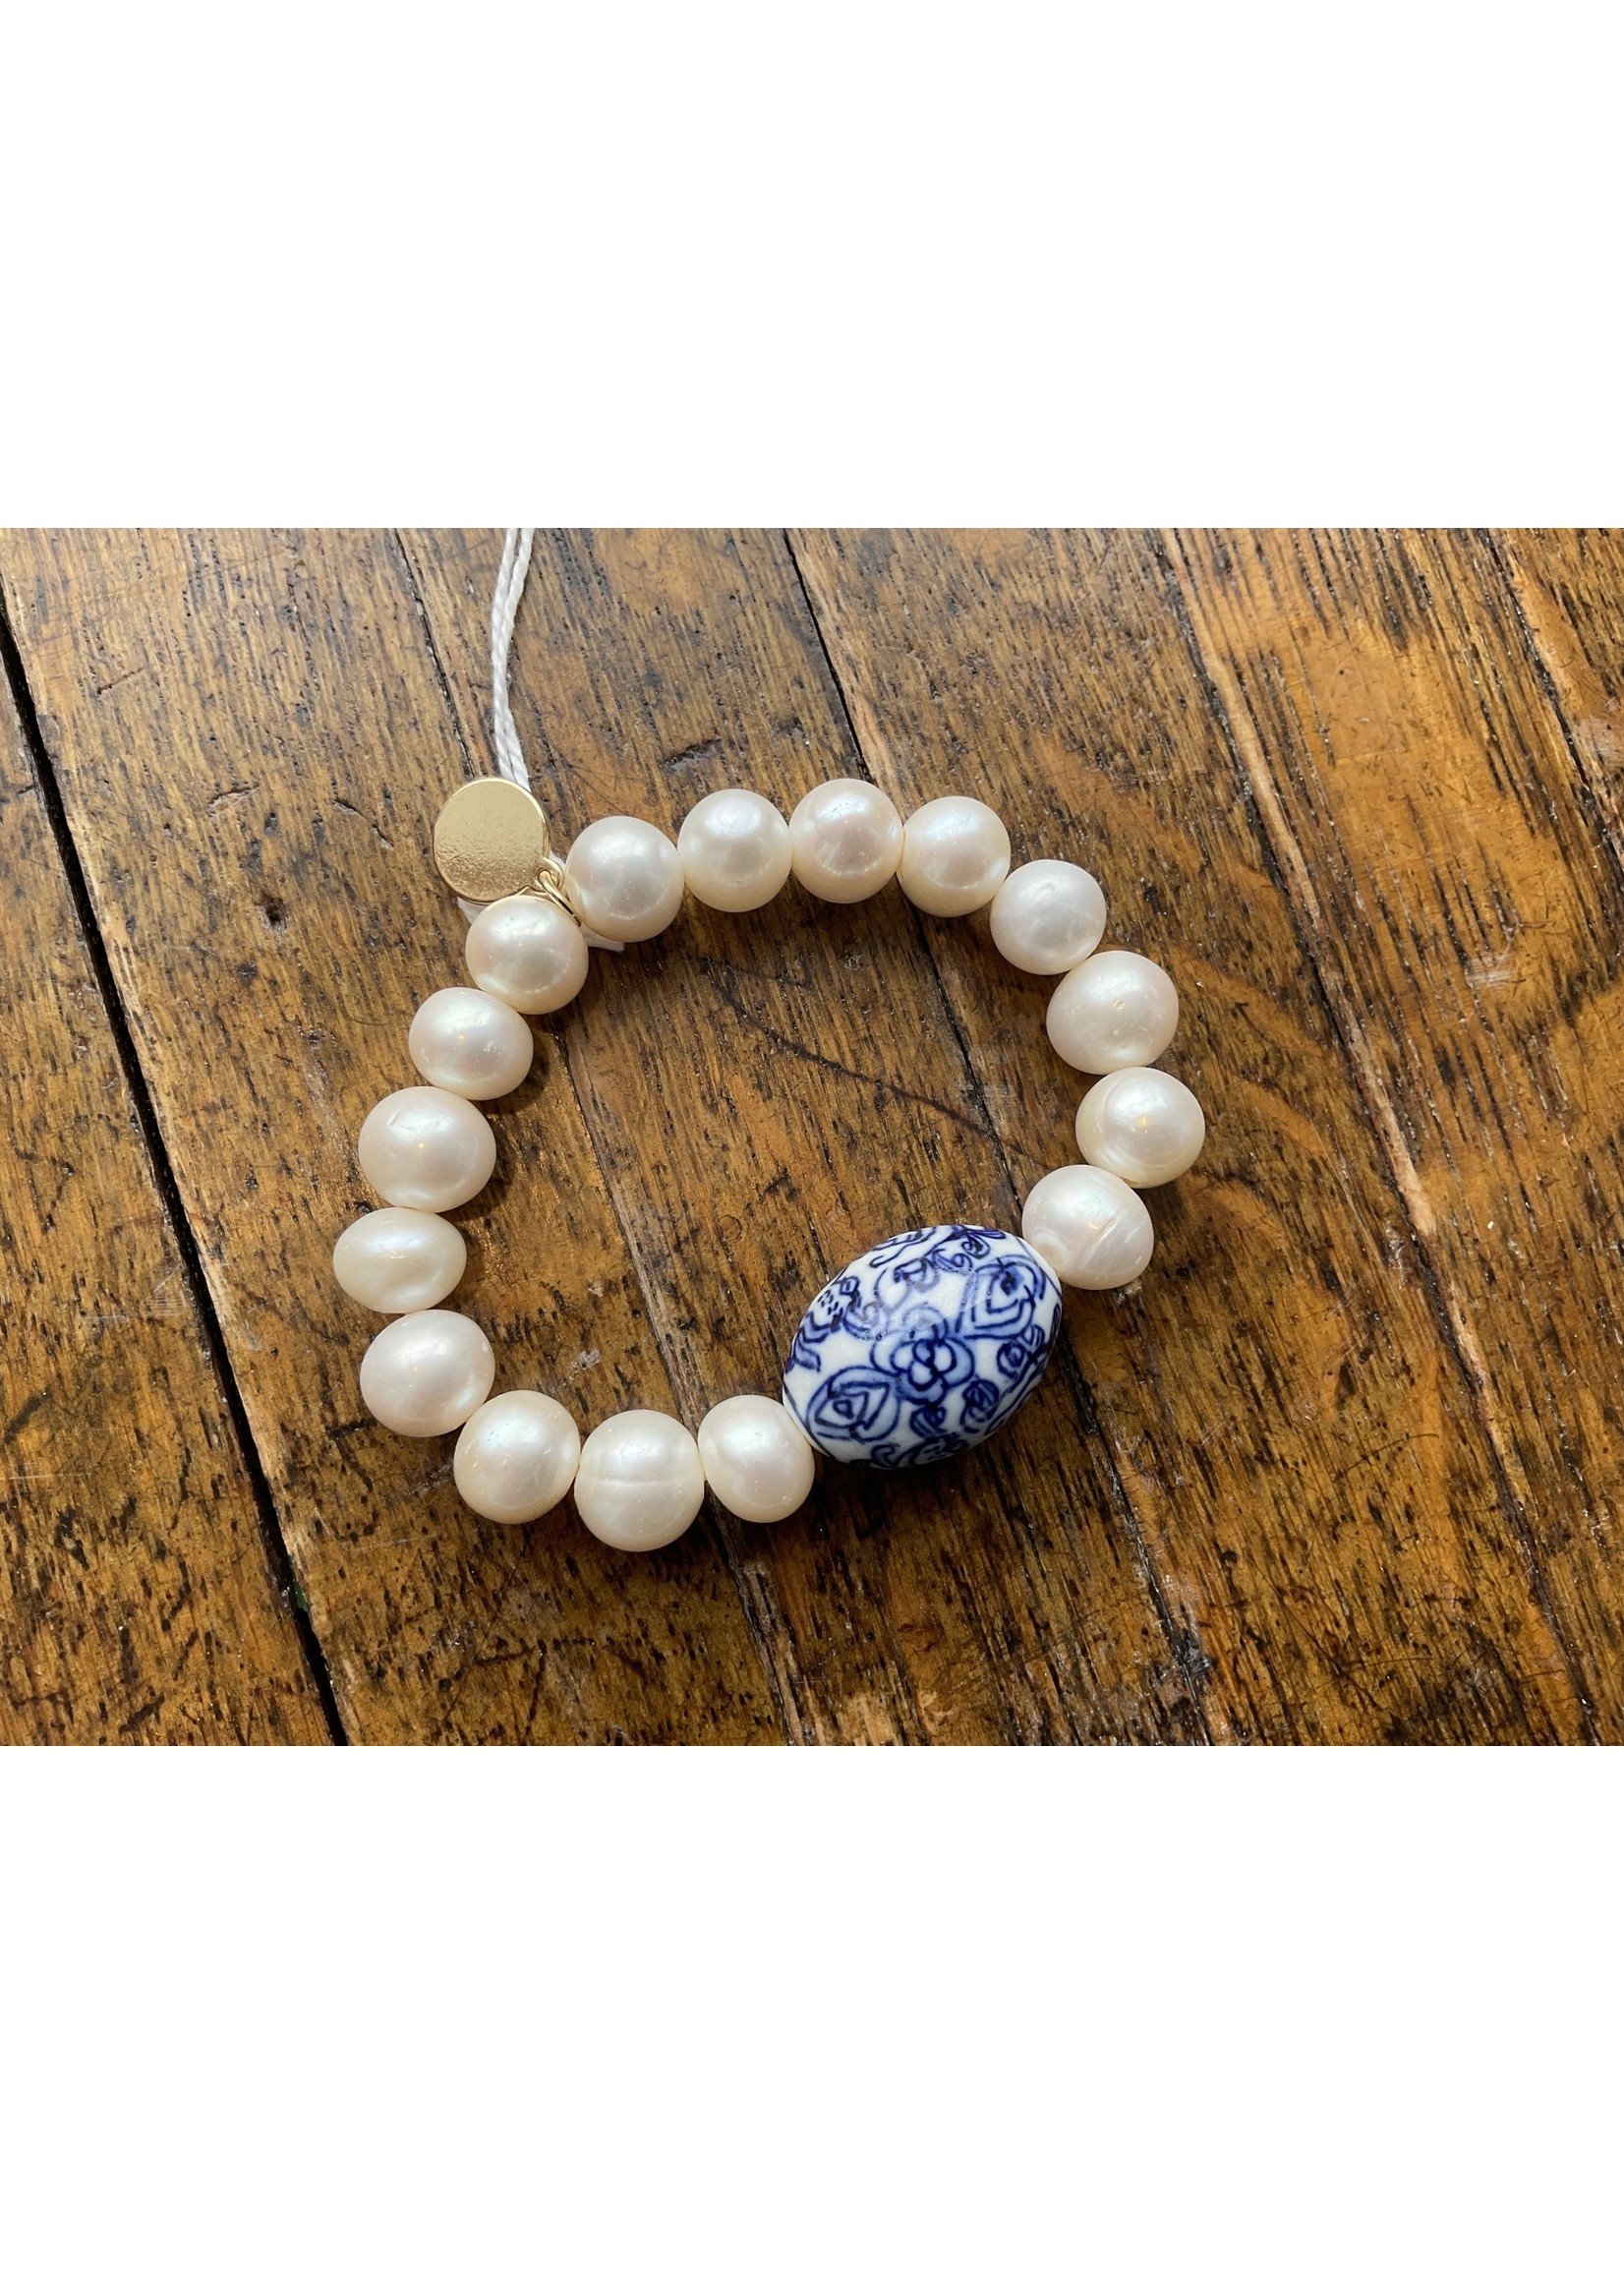 Wendy Perry Designs Pearl and Chinoiserie Bracelet with Egg Shaped Blue and White Porcelain